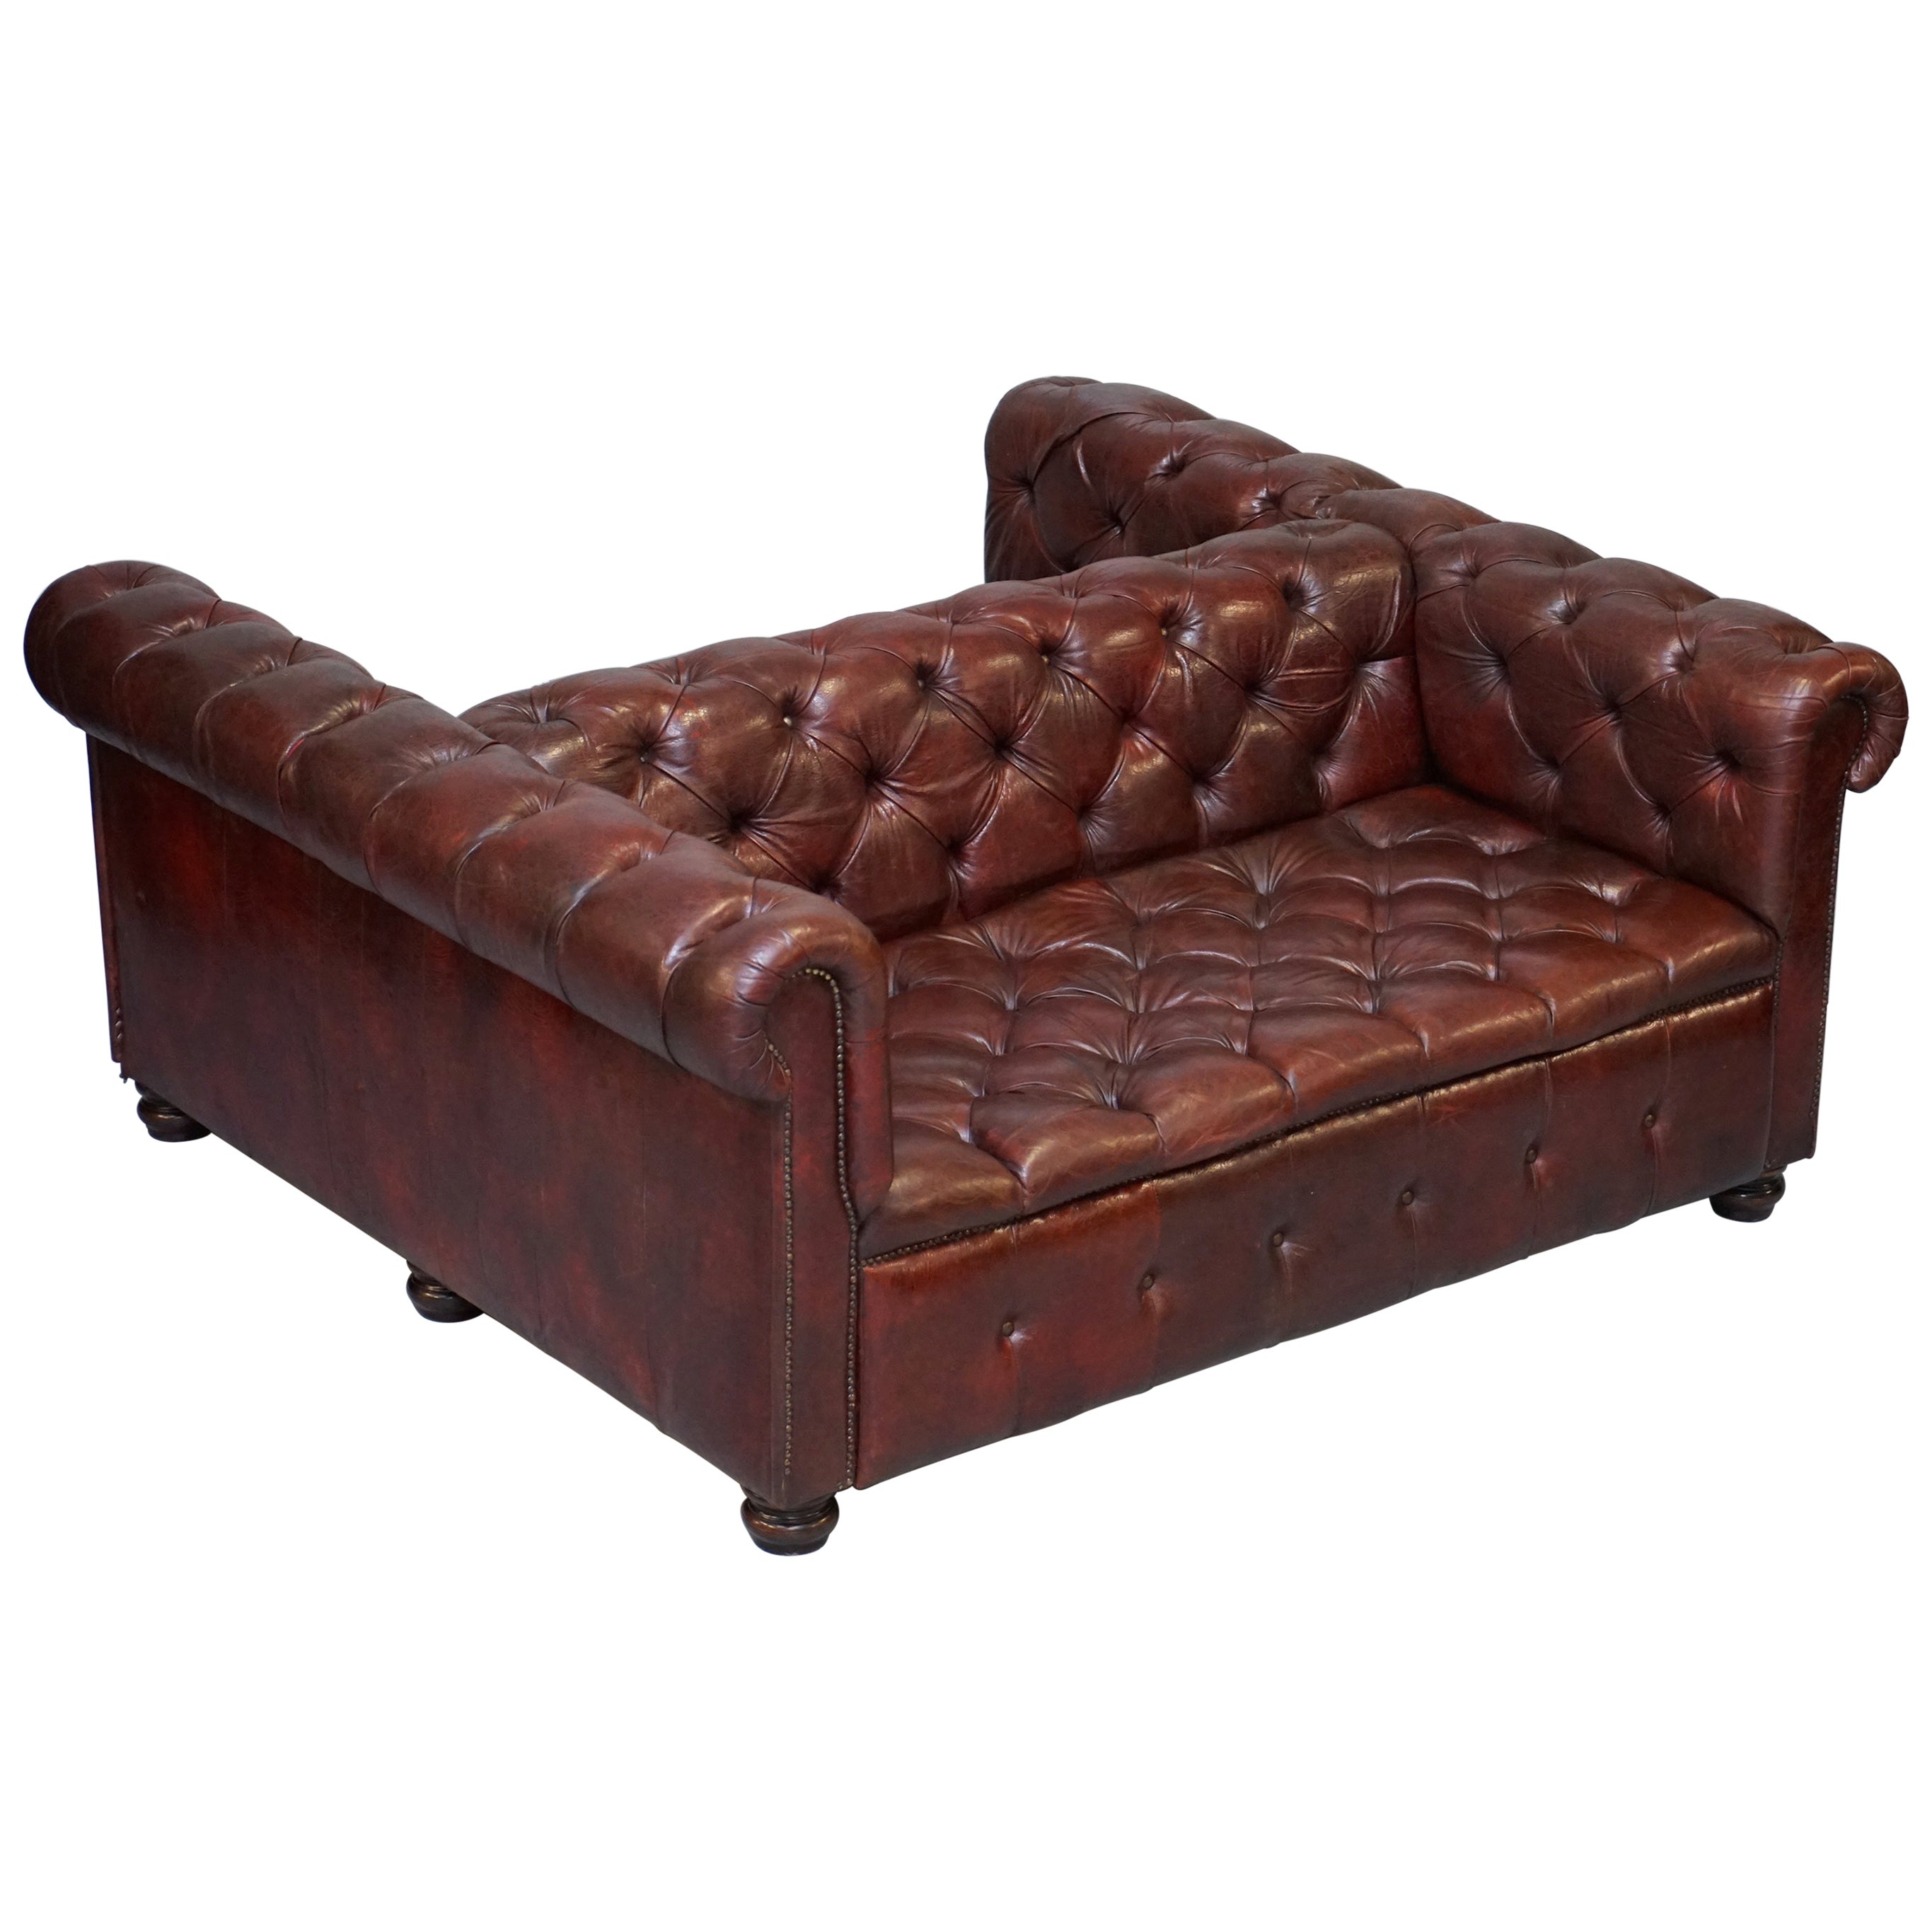 Custom Double Sided Chesterfield Sofa For Sale At 1stdibs